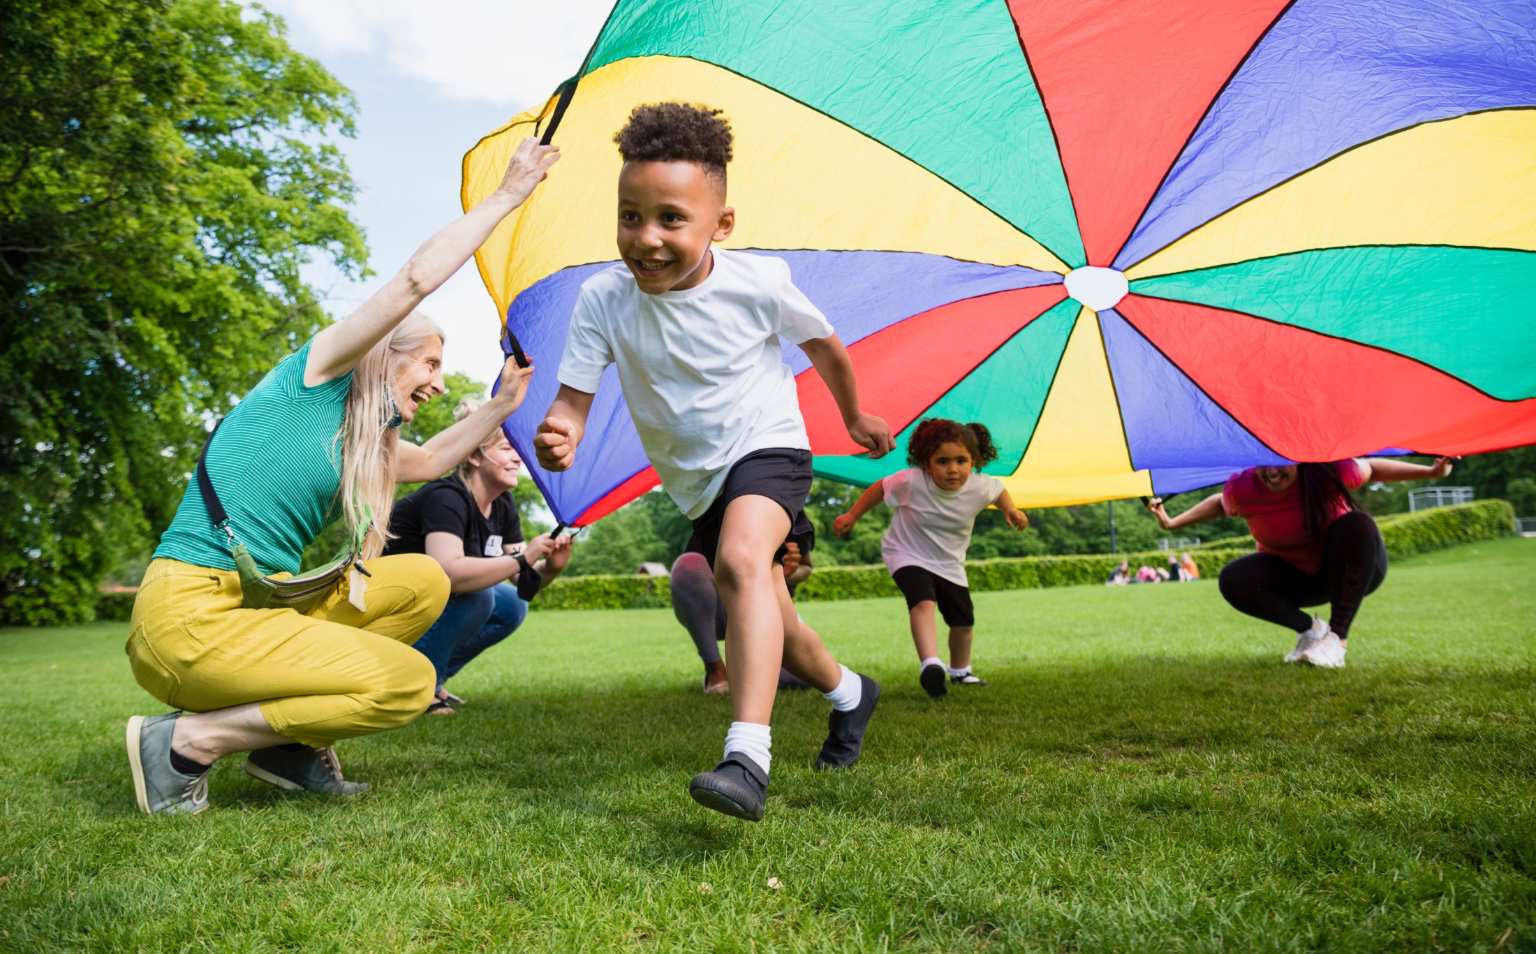 Children playing outside with adults, under a colourful parachute.